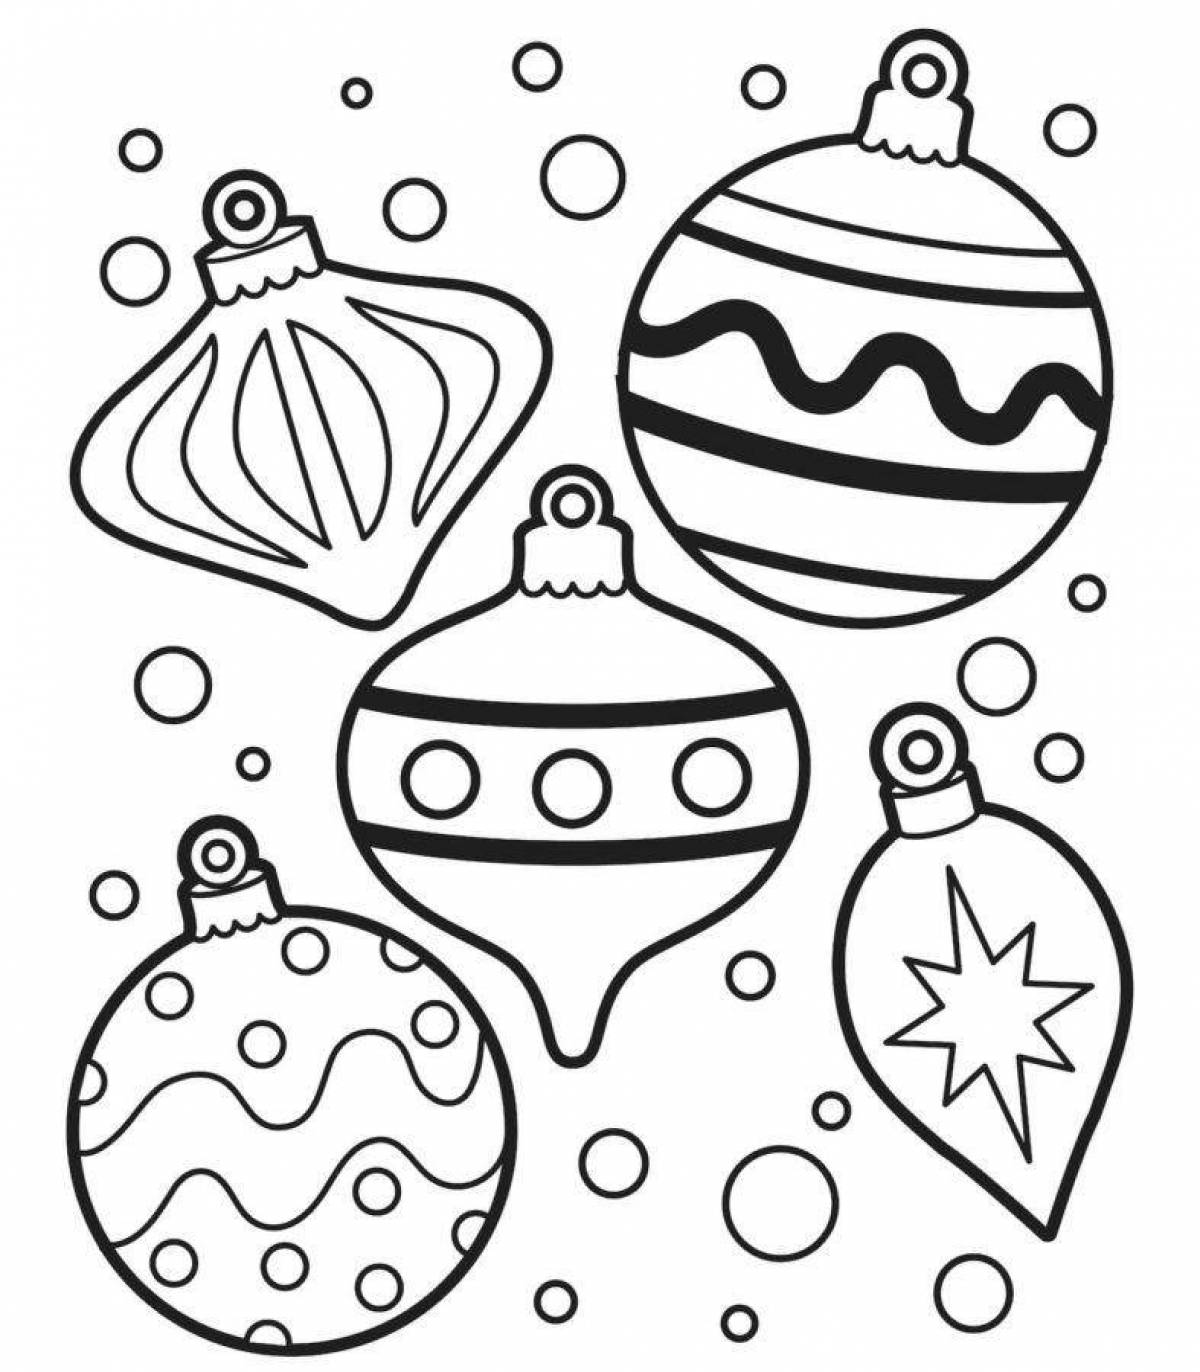 Coloring bright christmas ball for kids